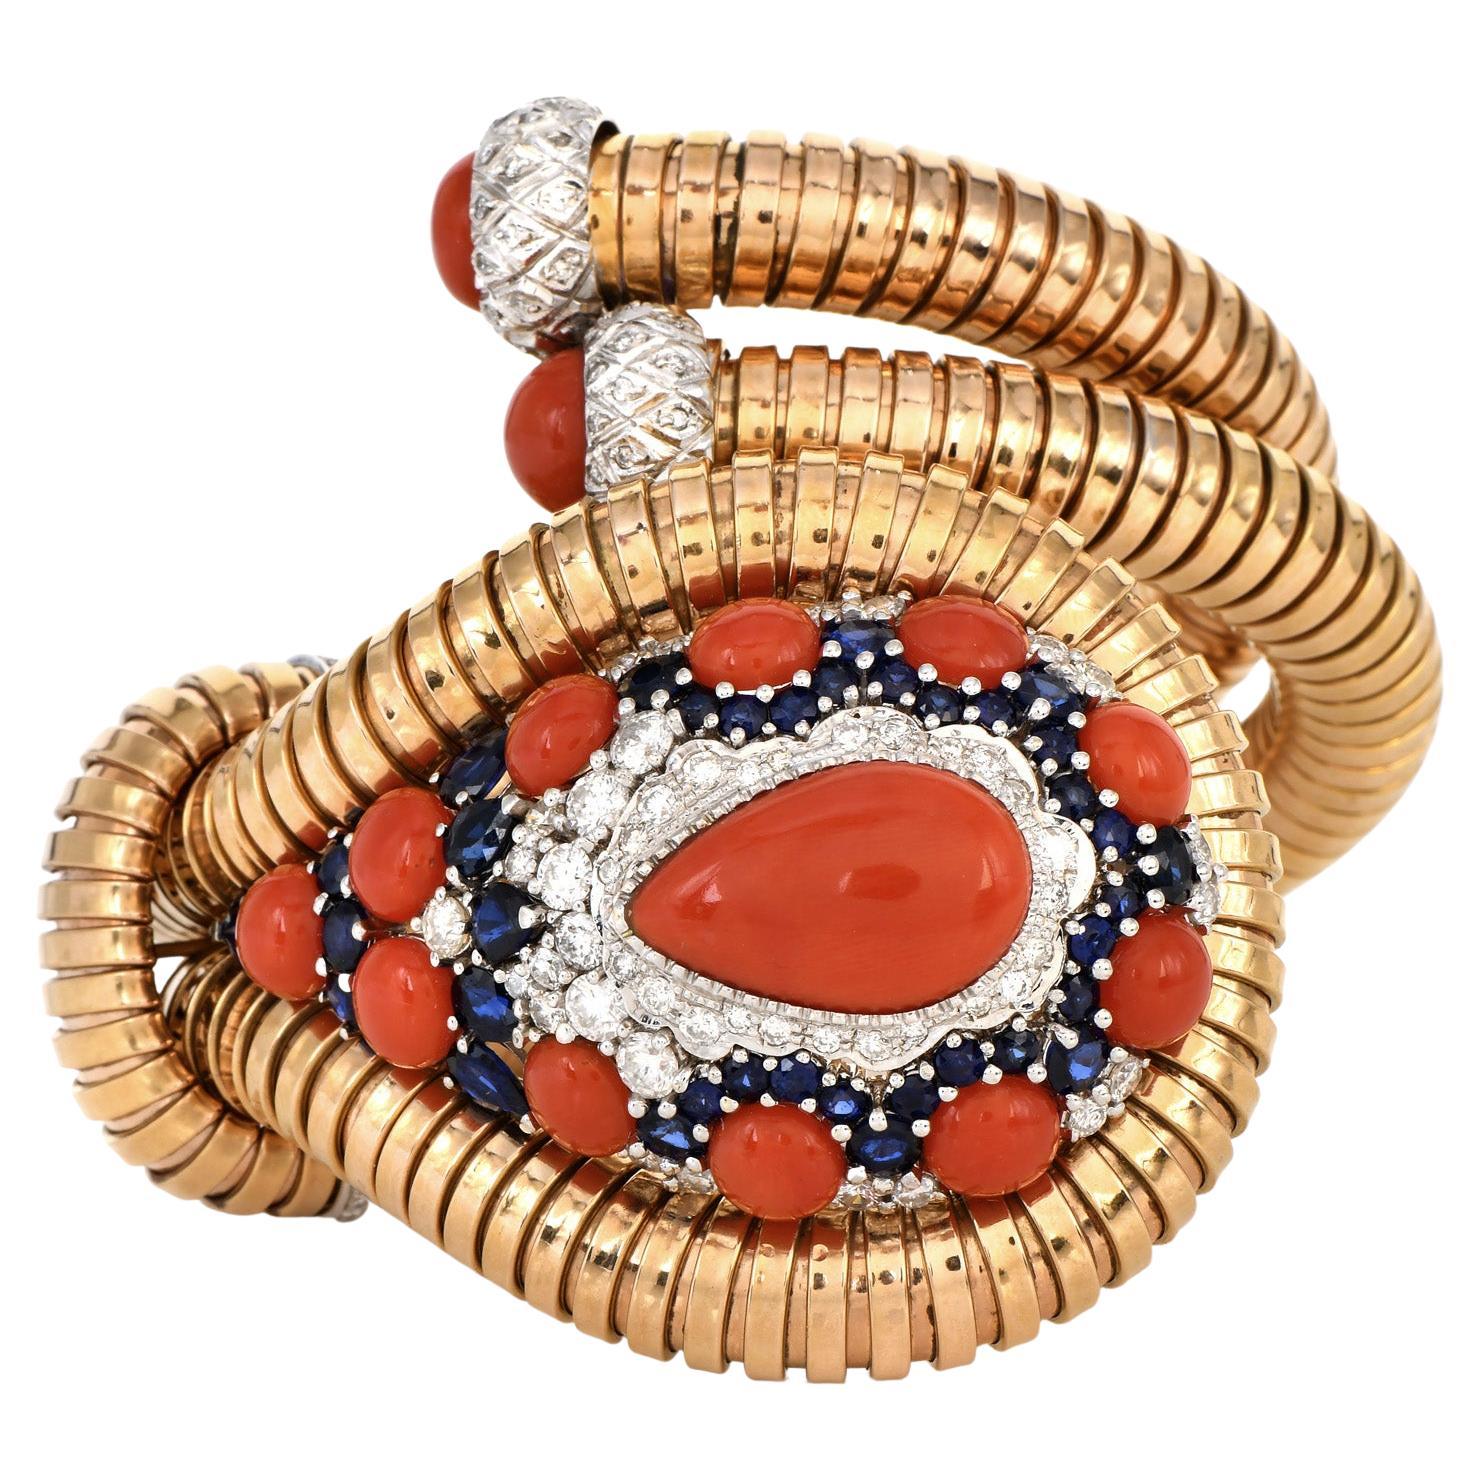 This magnificent double cuff 1950s bracelet is a show stopper inspired by the Cobra King Snake!

They are crafted in Solid 18K Rose Gold, 109.3 of total weight.

Enhanced by a cabochon pear cut, genuine Red Coral, in the center, adorned by 13